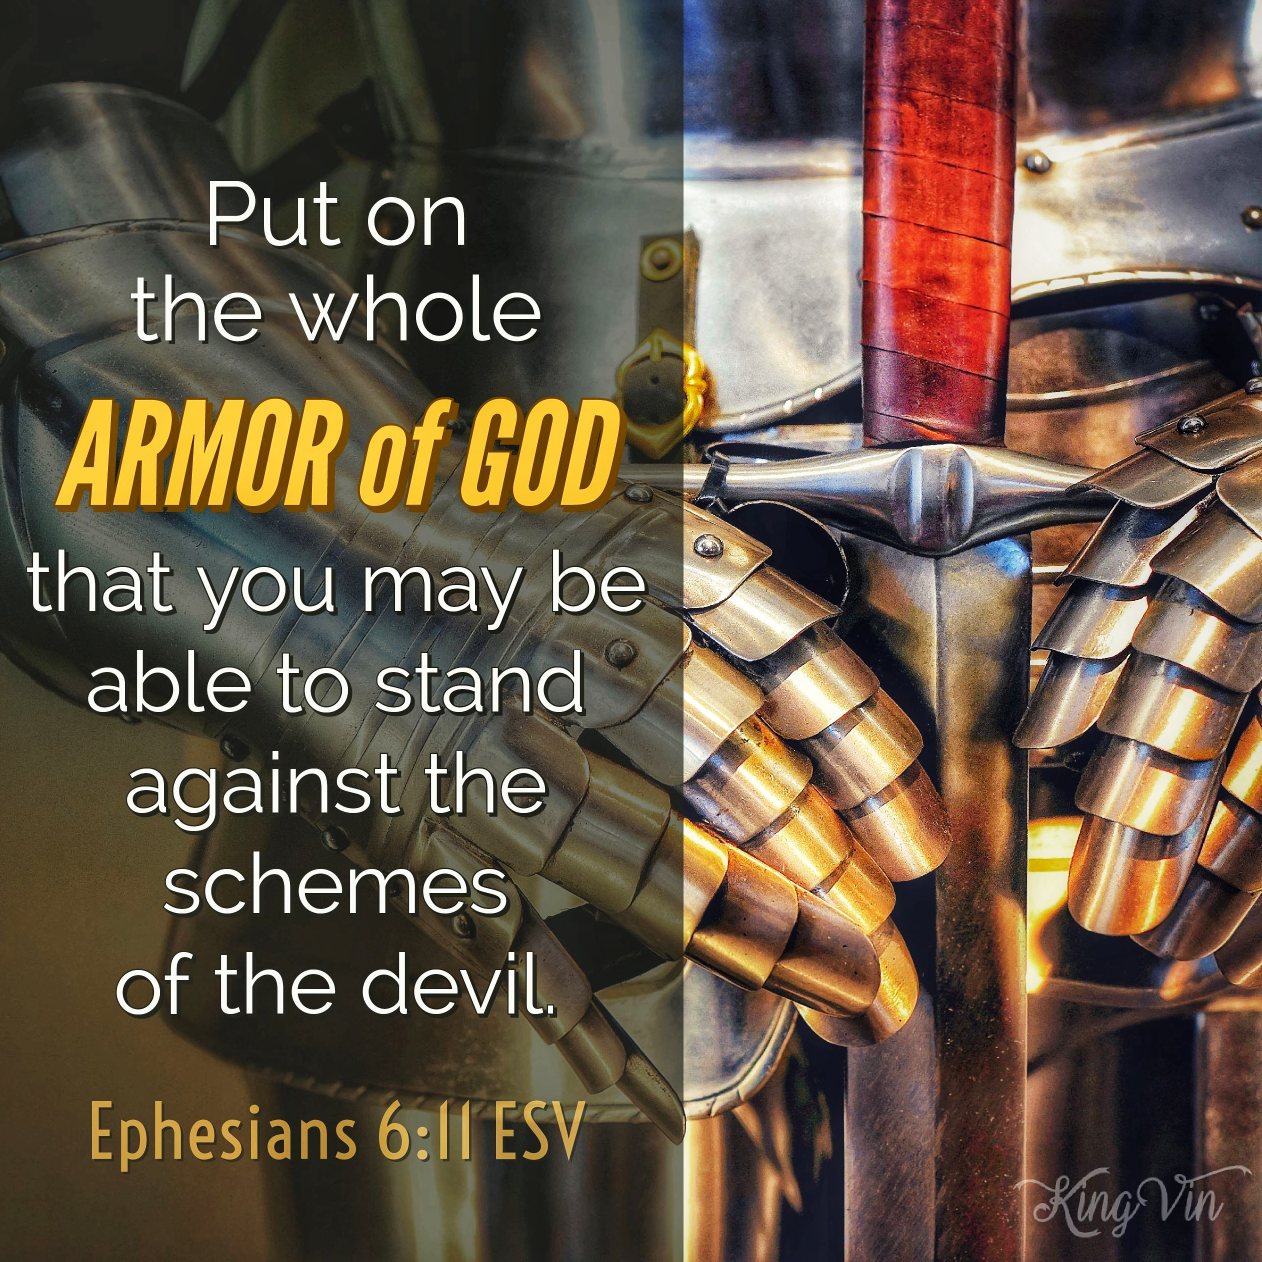 Put on the whole armor of God, that you may be able to stand against the schemes of the devil. Ephesians 6:11 ESV